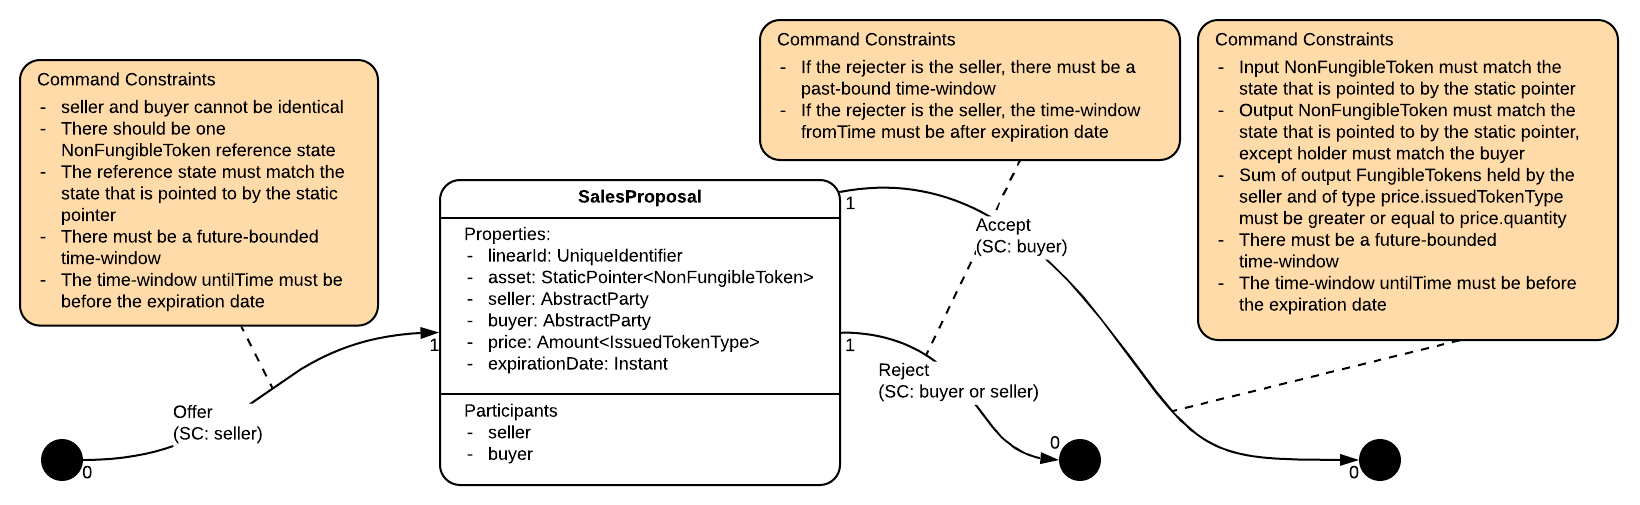 Updated Sales Proposal State Machine View